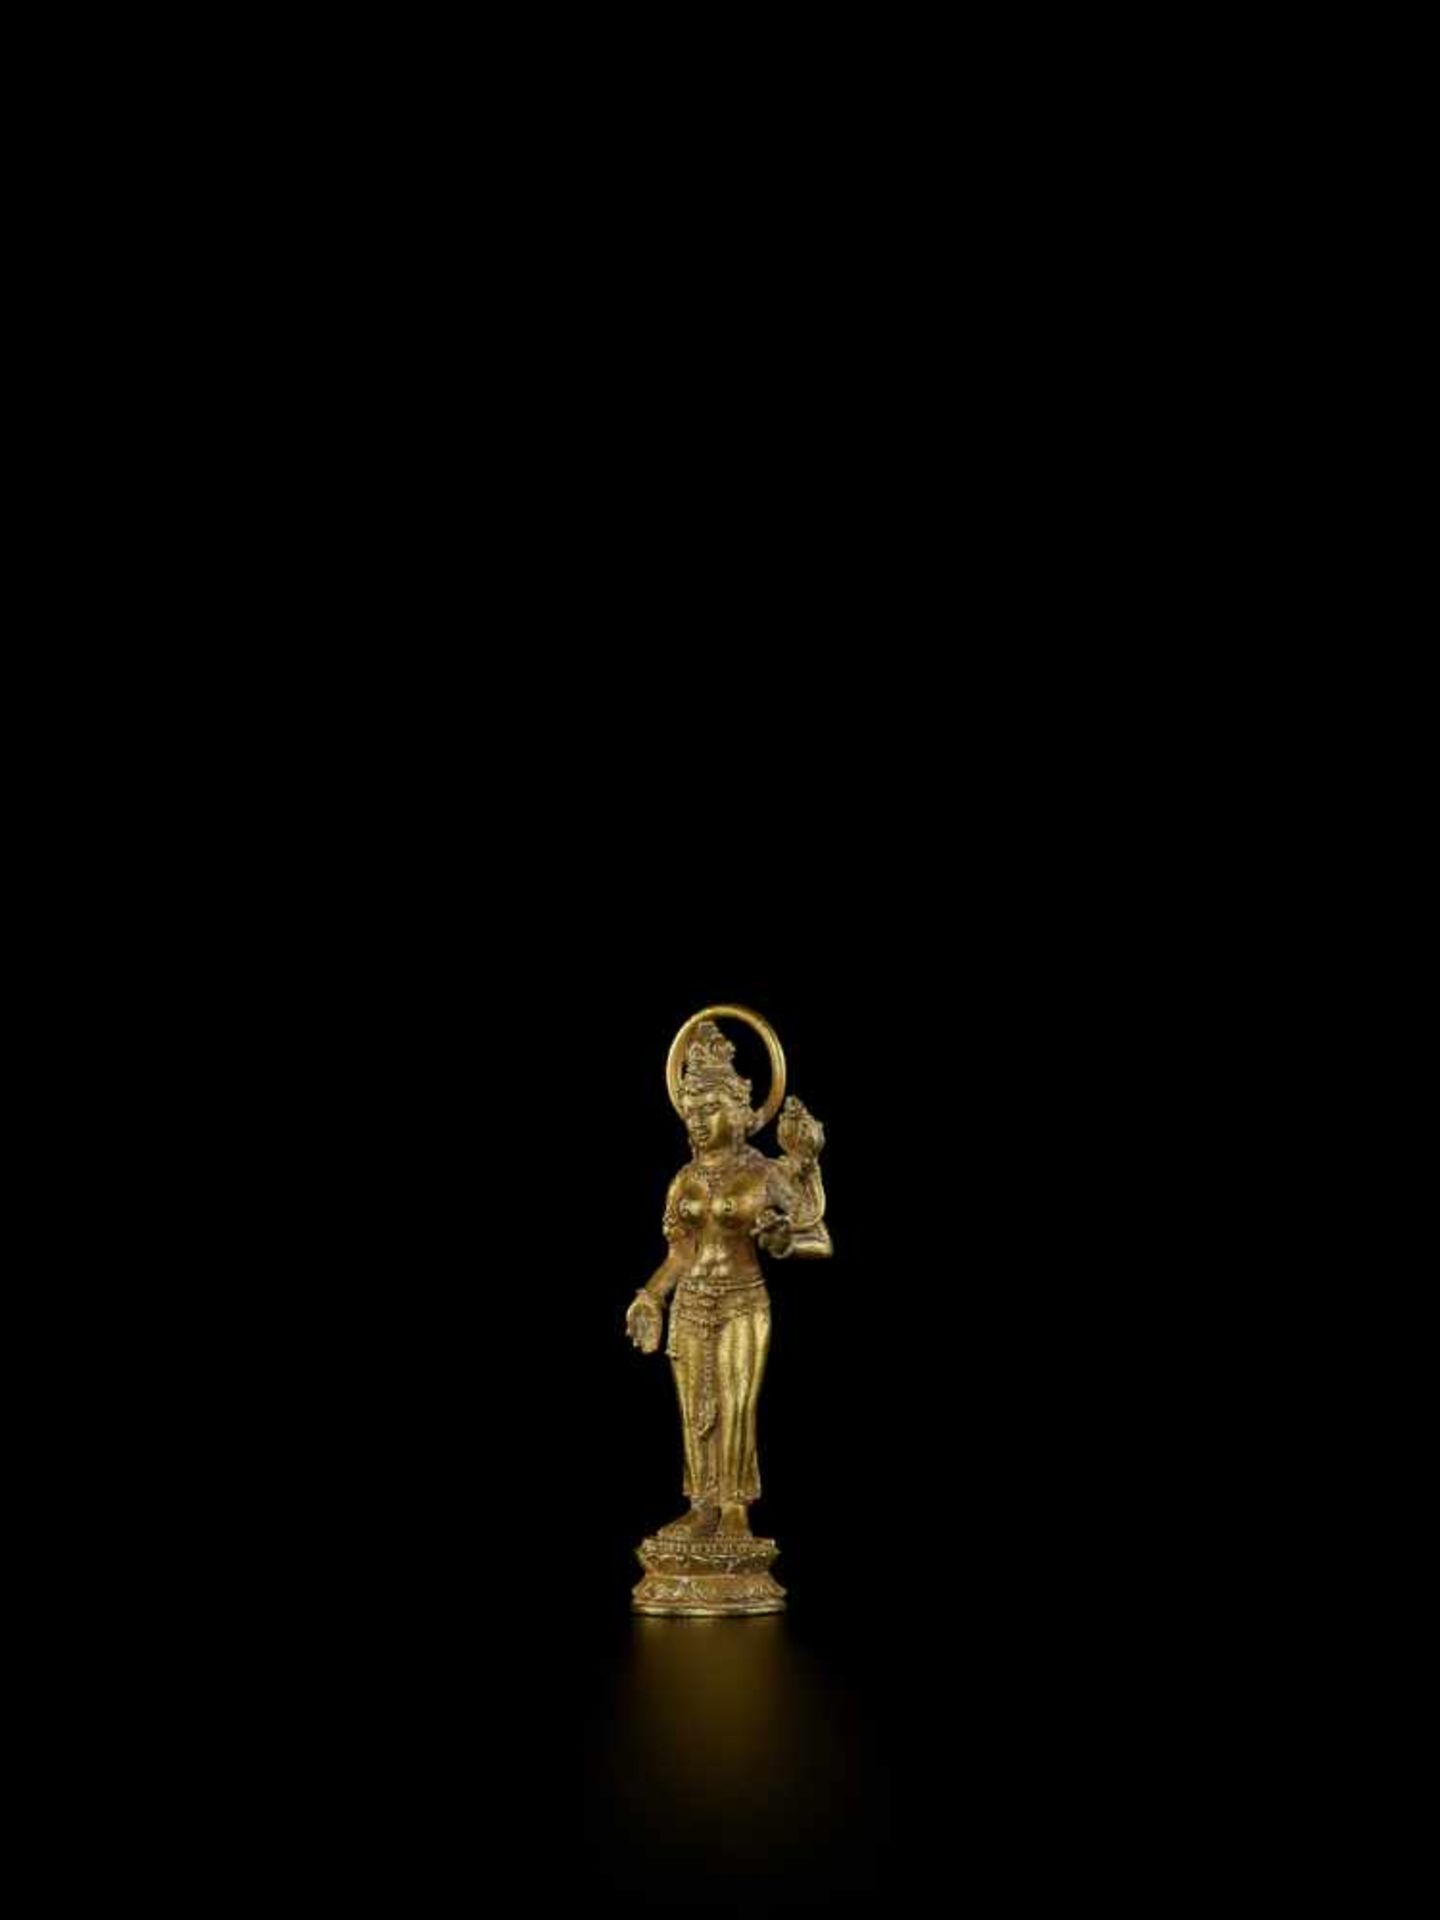 A JAVANESE GOLD FIGURE OF UMA Java, Indonesia, 20th century. The gold-cast figure of the non-Vedic